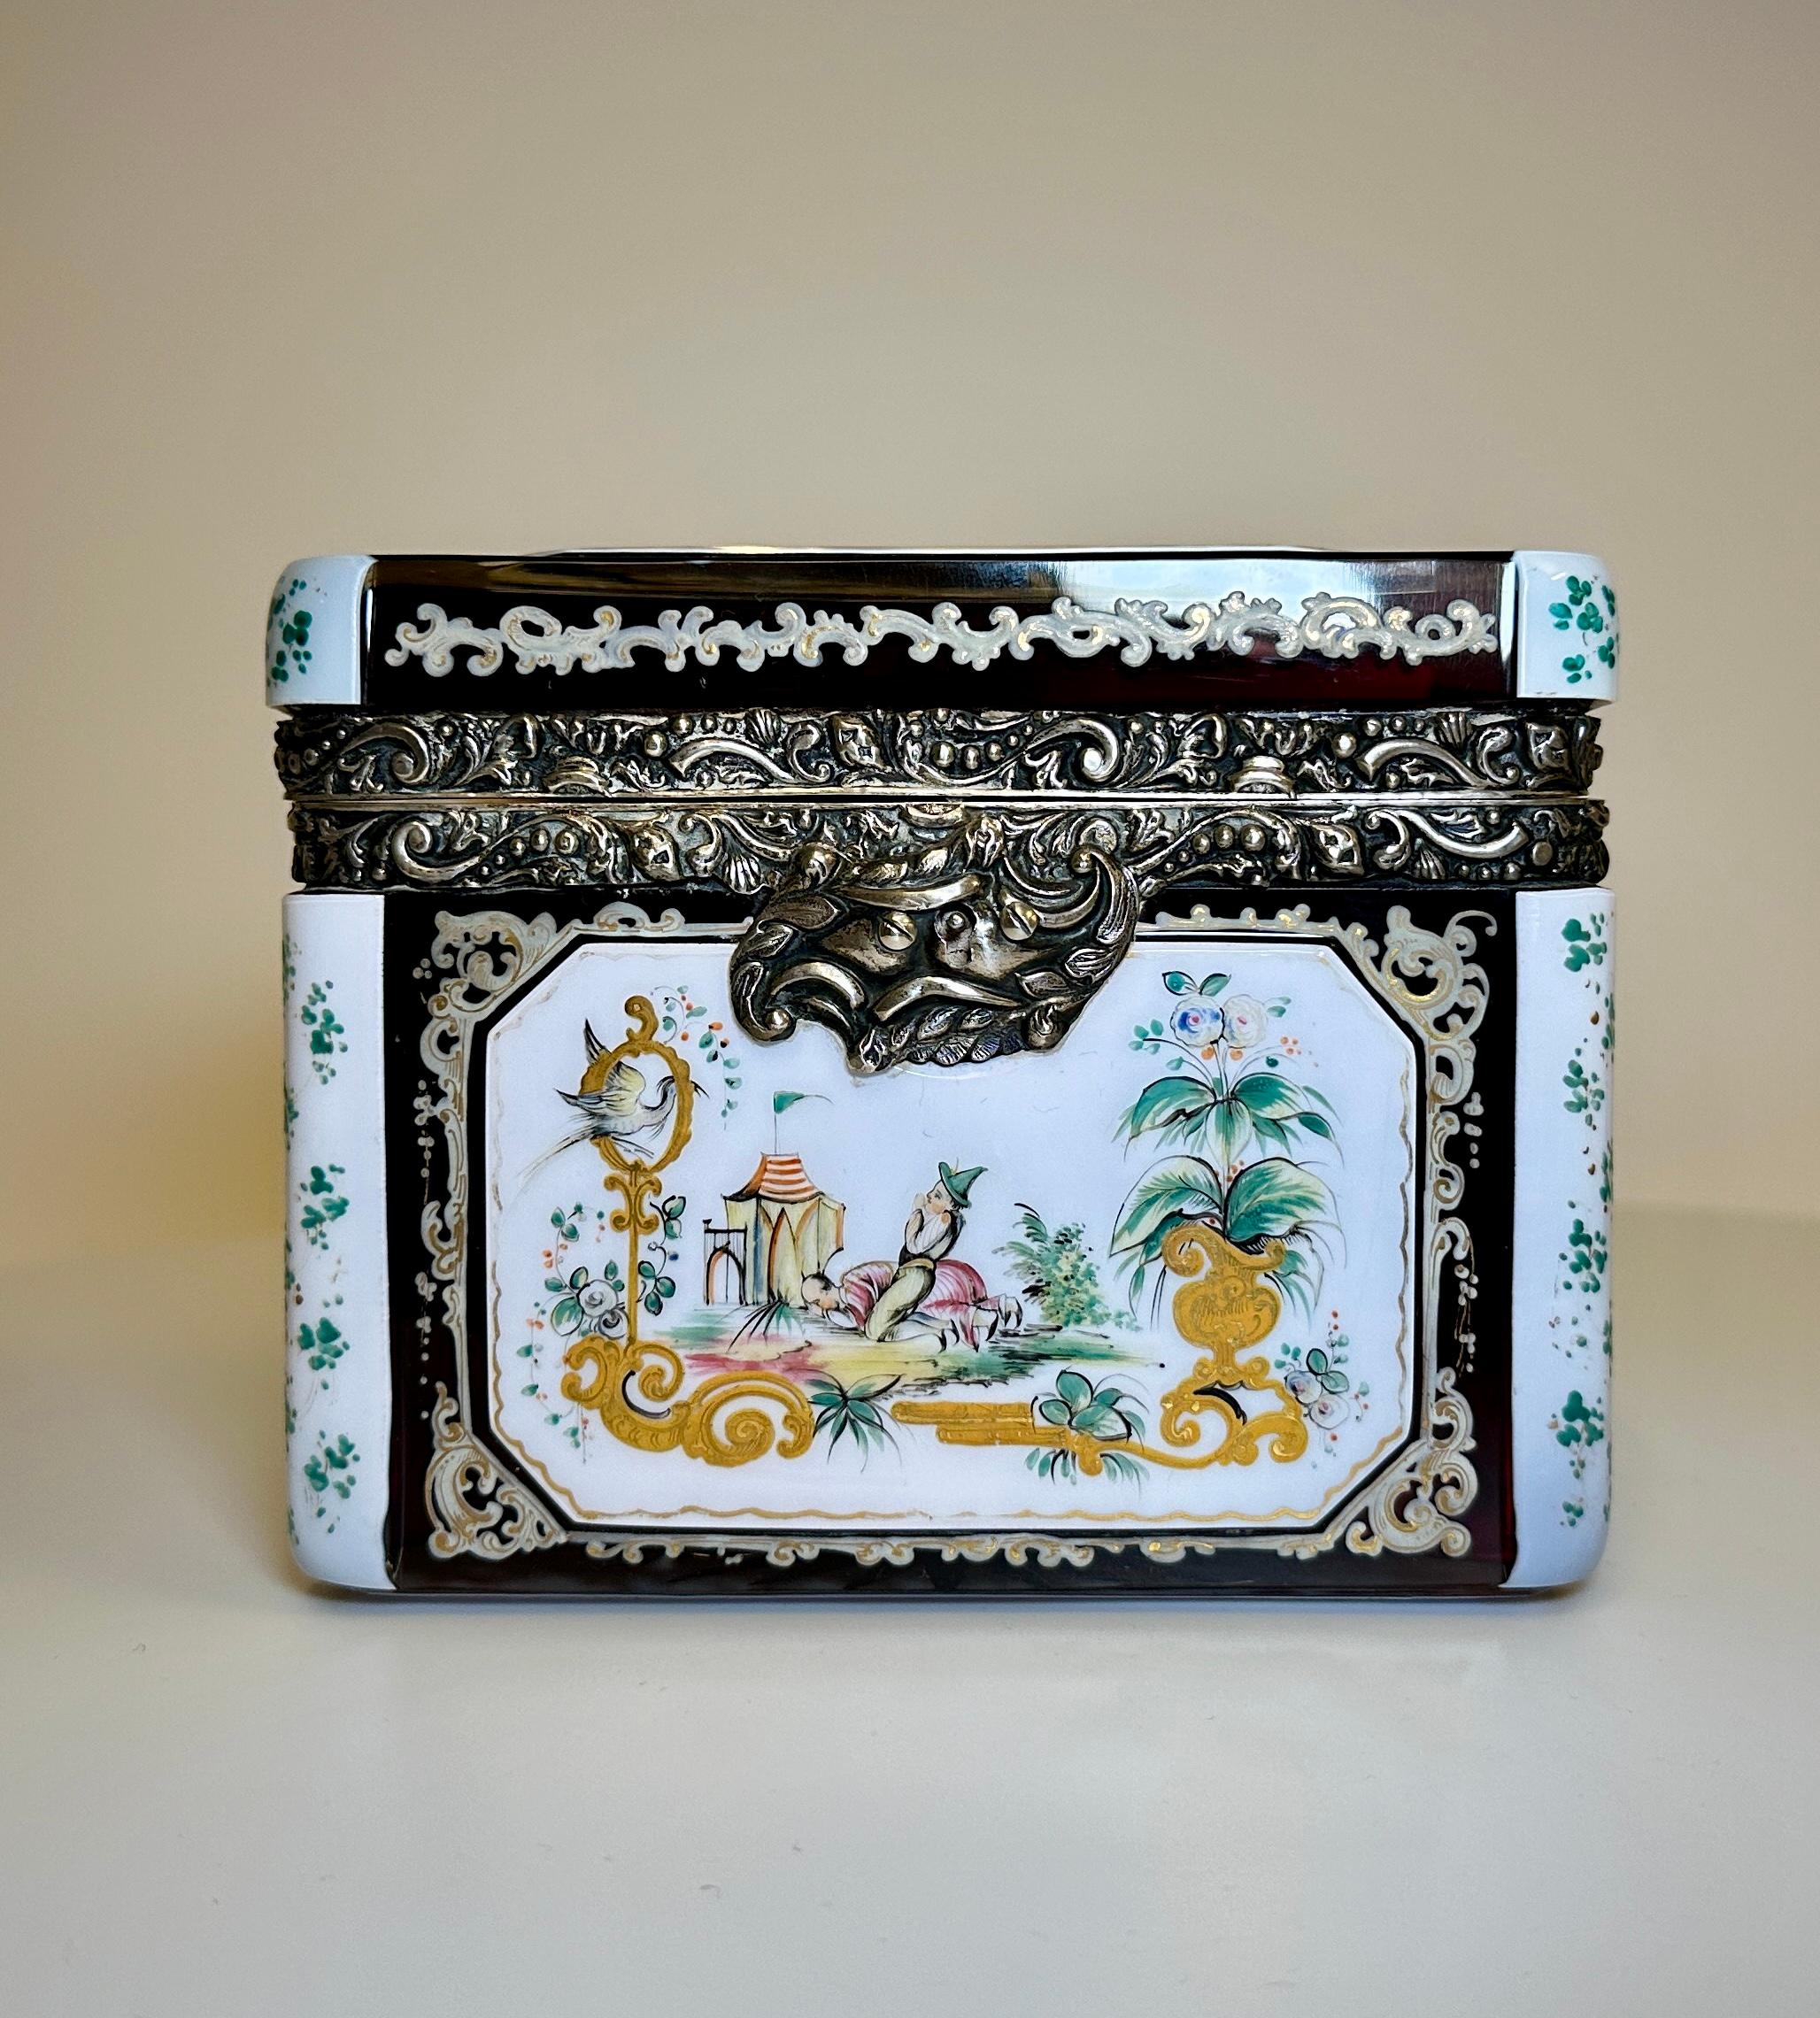 Bohemian silver-mounted overlay and enameled box, dated 1852 with chinoiserie decorations and Viennese silver.